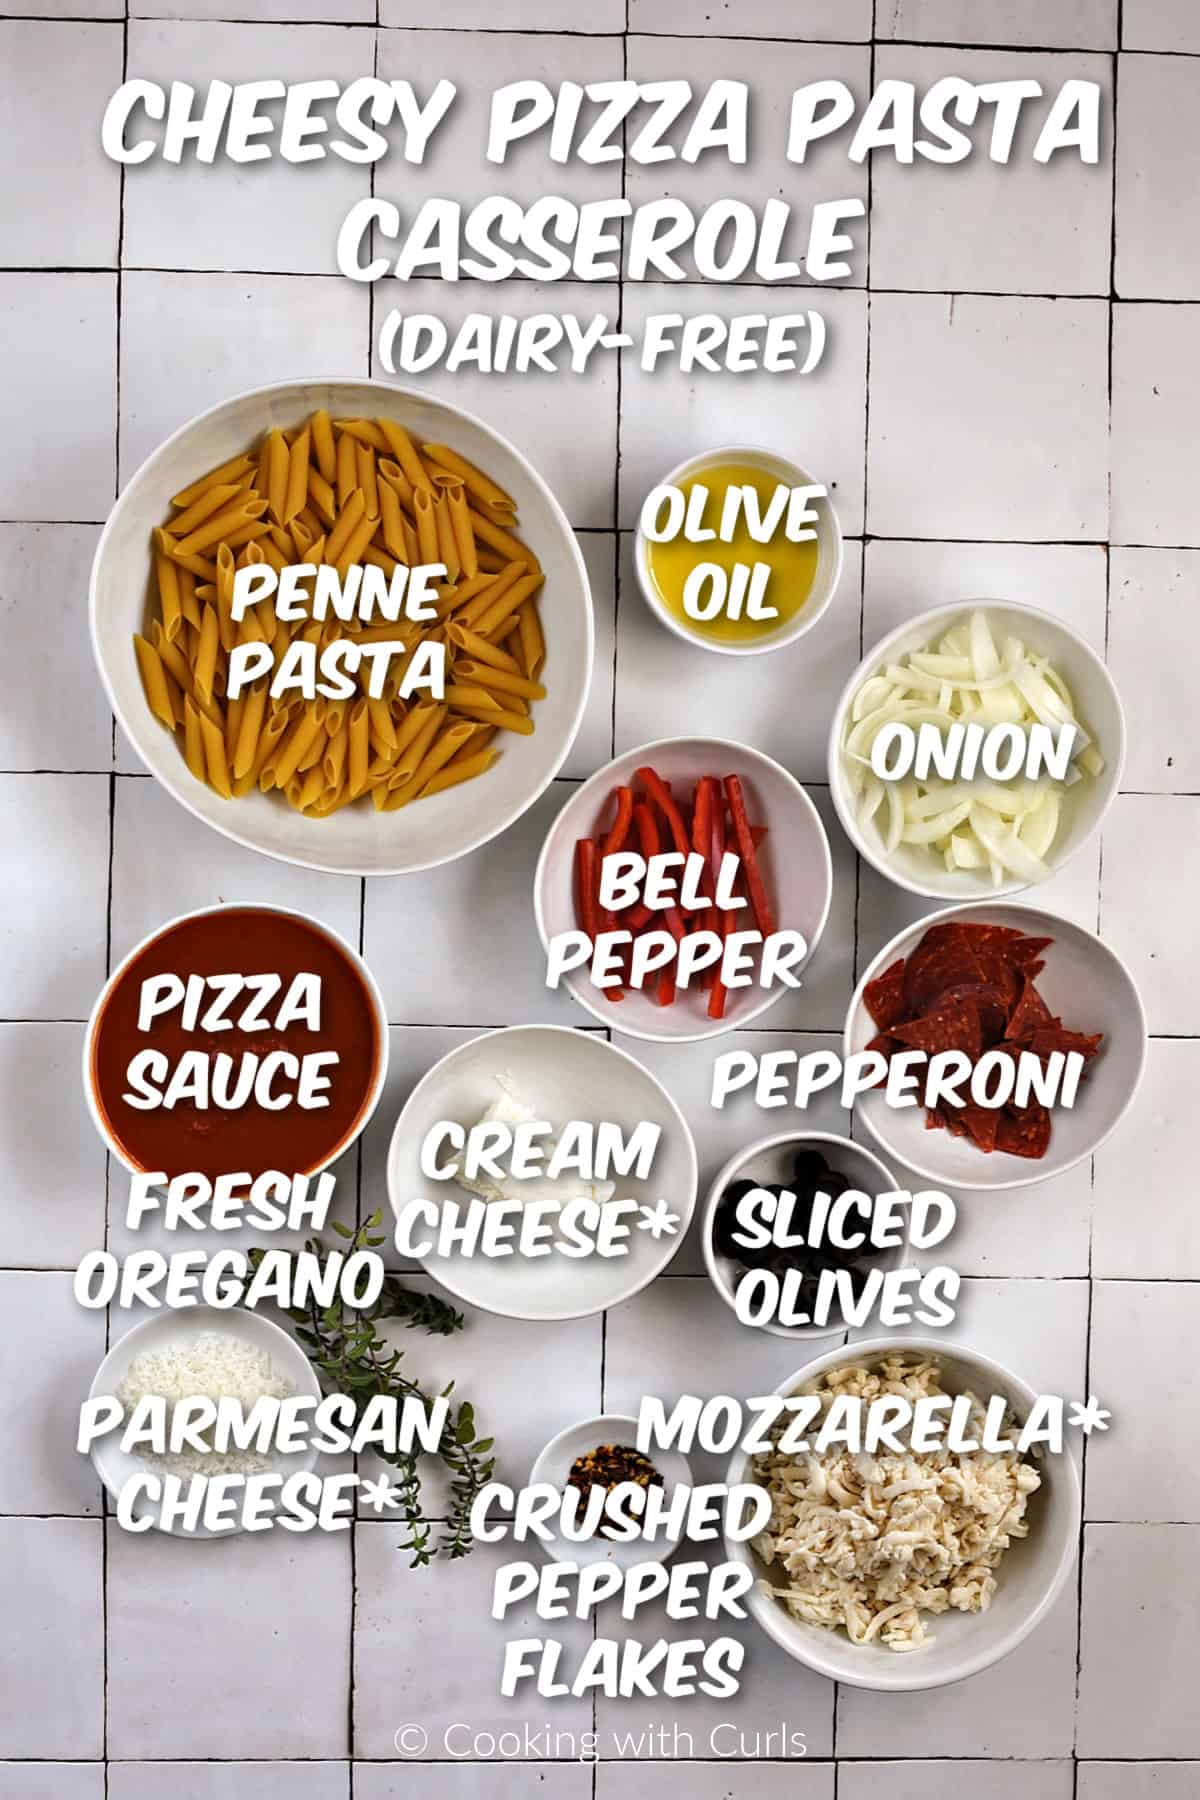 Ingredients needed to make cheesy pizza pasta casserole.